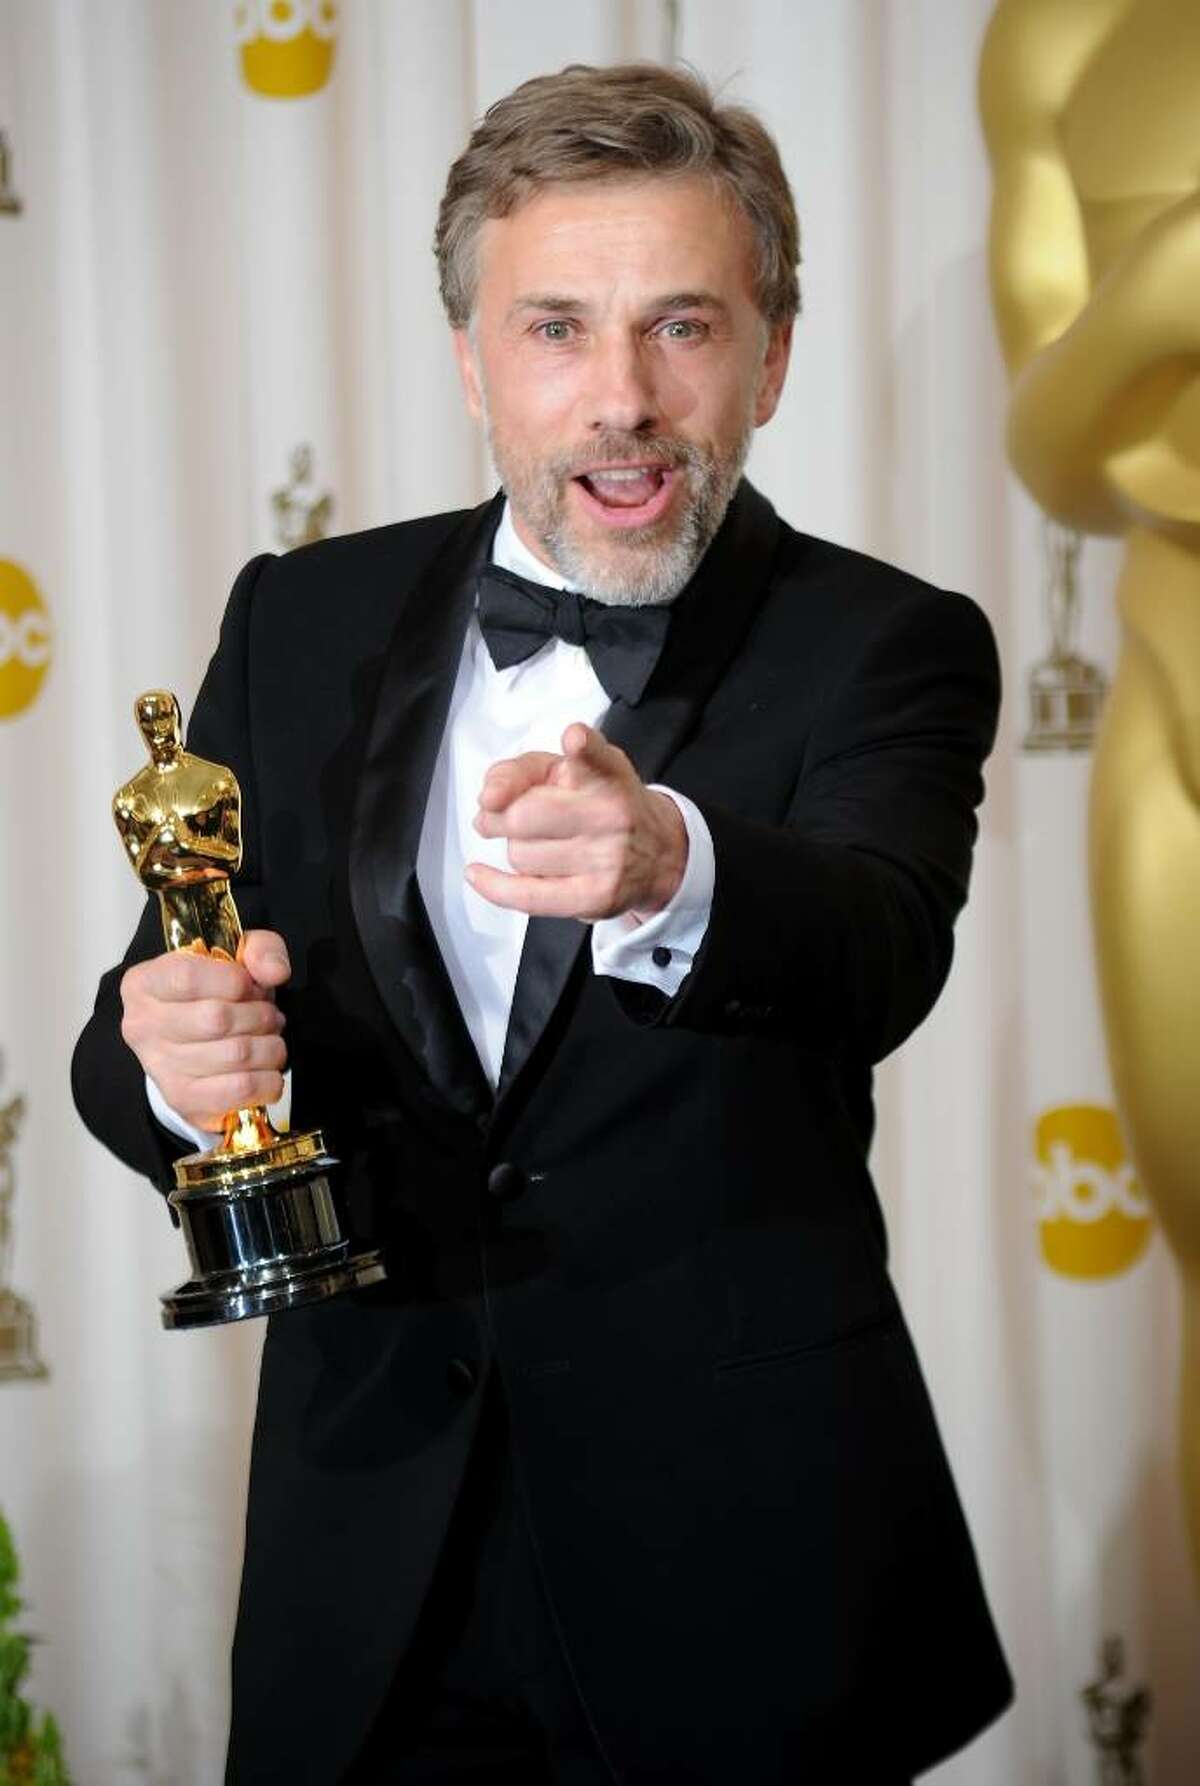 HOLLYWOOD - MARCH 07: (EDITORS NOTE: NO ONLINE, NO INTERNET, EMBARGOED FROM INTERNET AND TELEVISION USAGE UNTIL THE CONCLUSION OF THE LIVE OSCARS TELECAST) Actor Christoph Waltz, winner of Best Supporting Actor award for "Inglourious Basterds," poses in the press room at the 82nd Annual Academy Awards held at Kodak Theatre on March 7, 2010 in Hollywood, California. (Photo by Jason Merritt/Getty Images) *** Local Caption *** Christoph Waltz